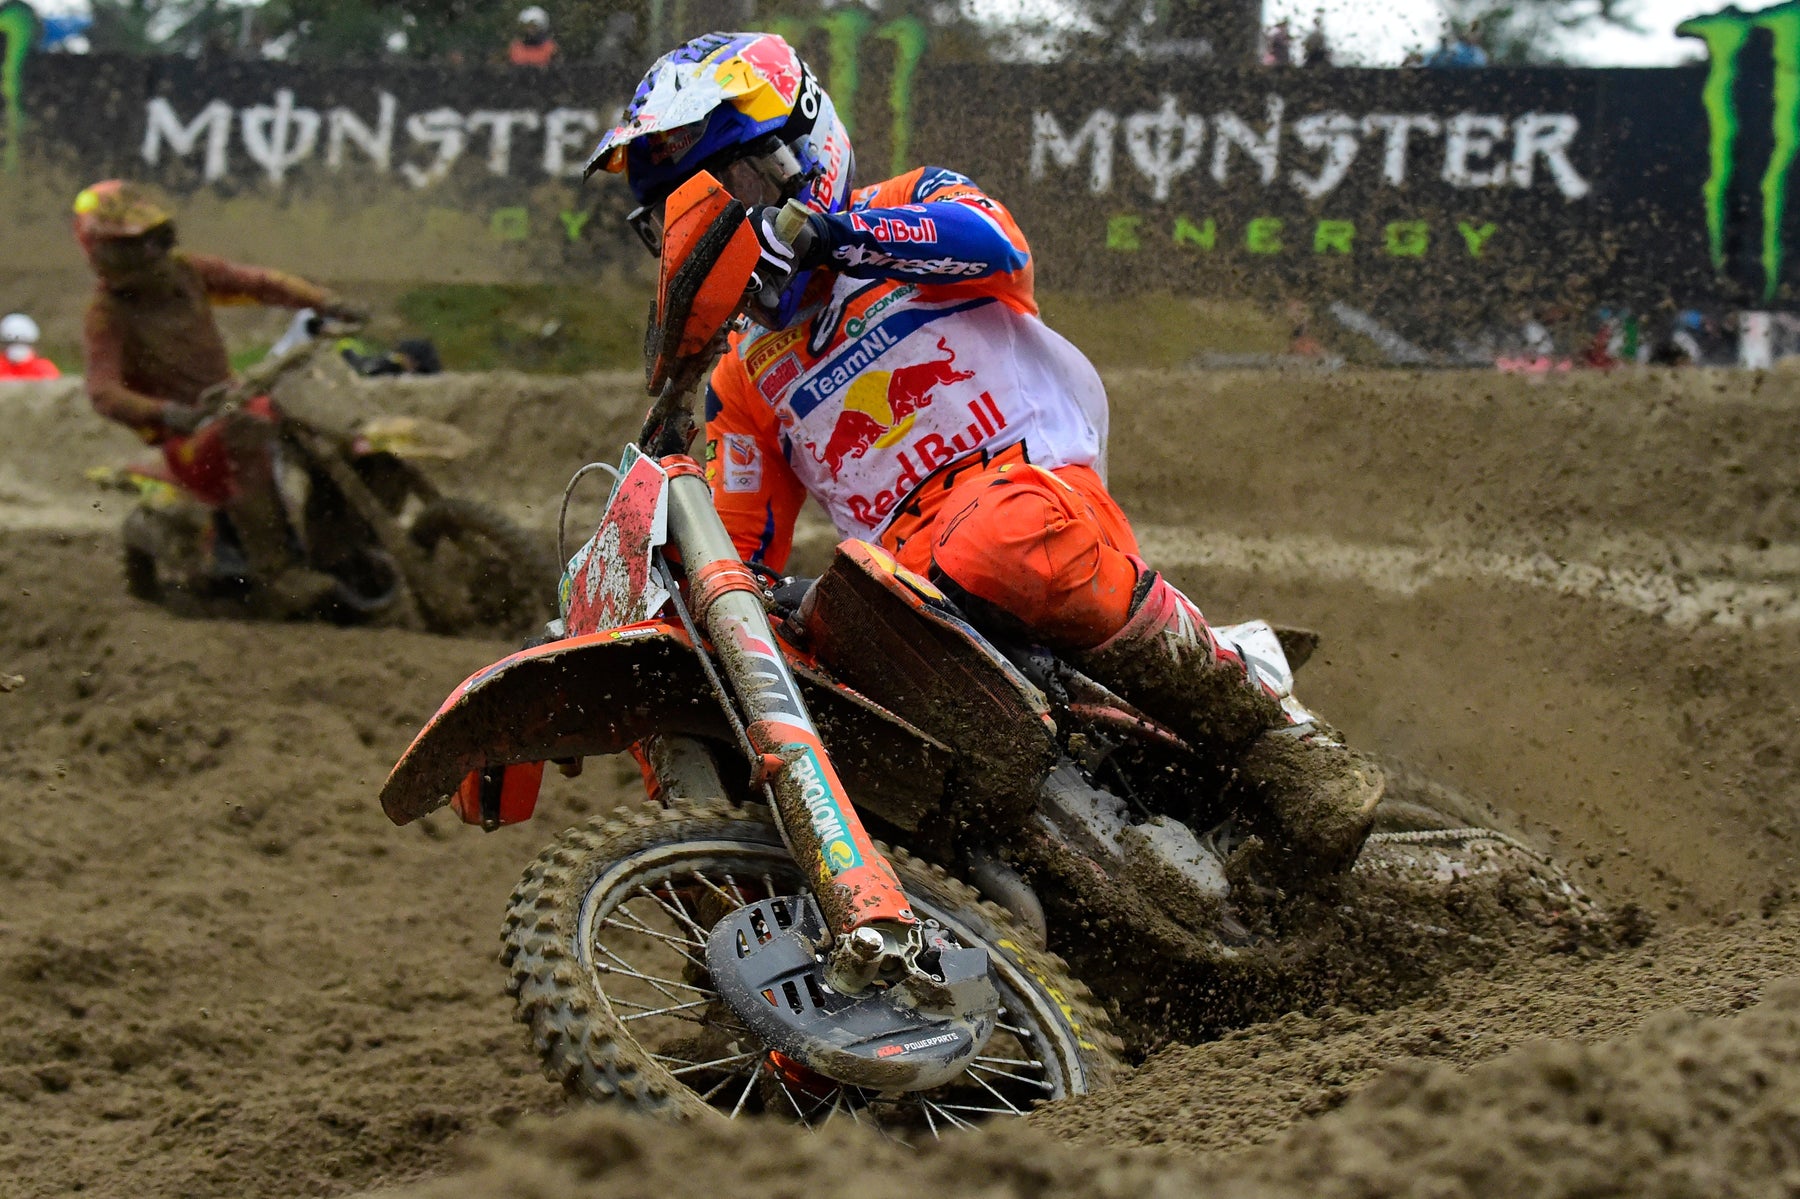 JEFFREY HERLINGS WINS OPEN CLASS AT FIM MOTOCROSS OF NATIONS IN MANTOVA, ITALY